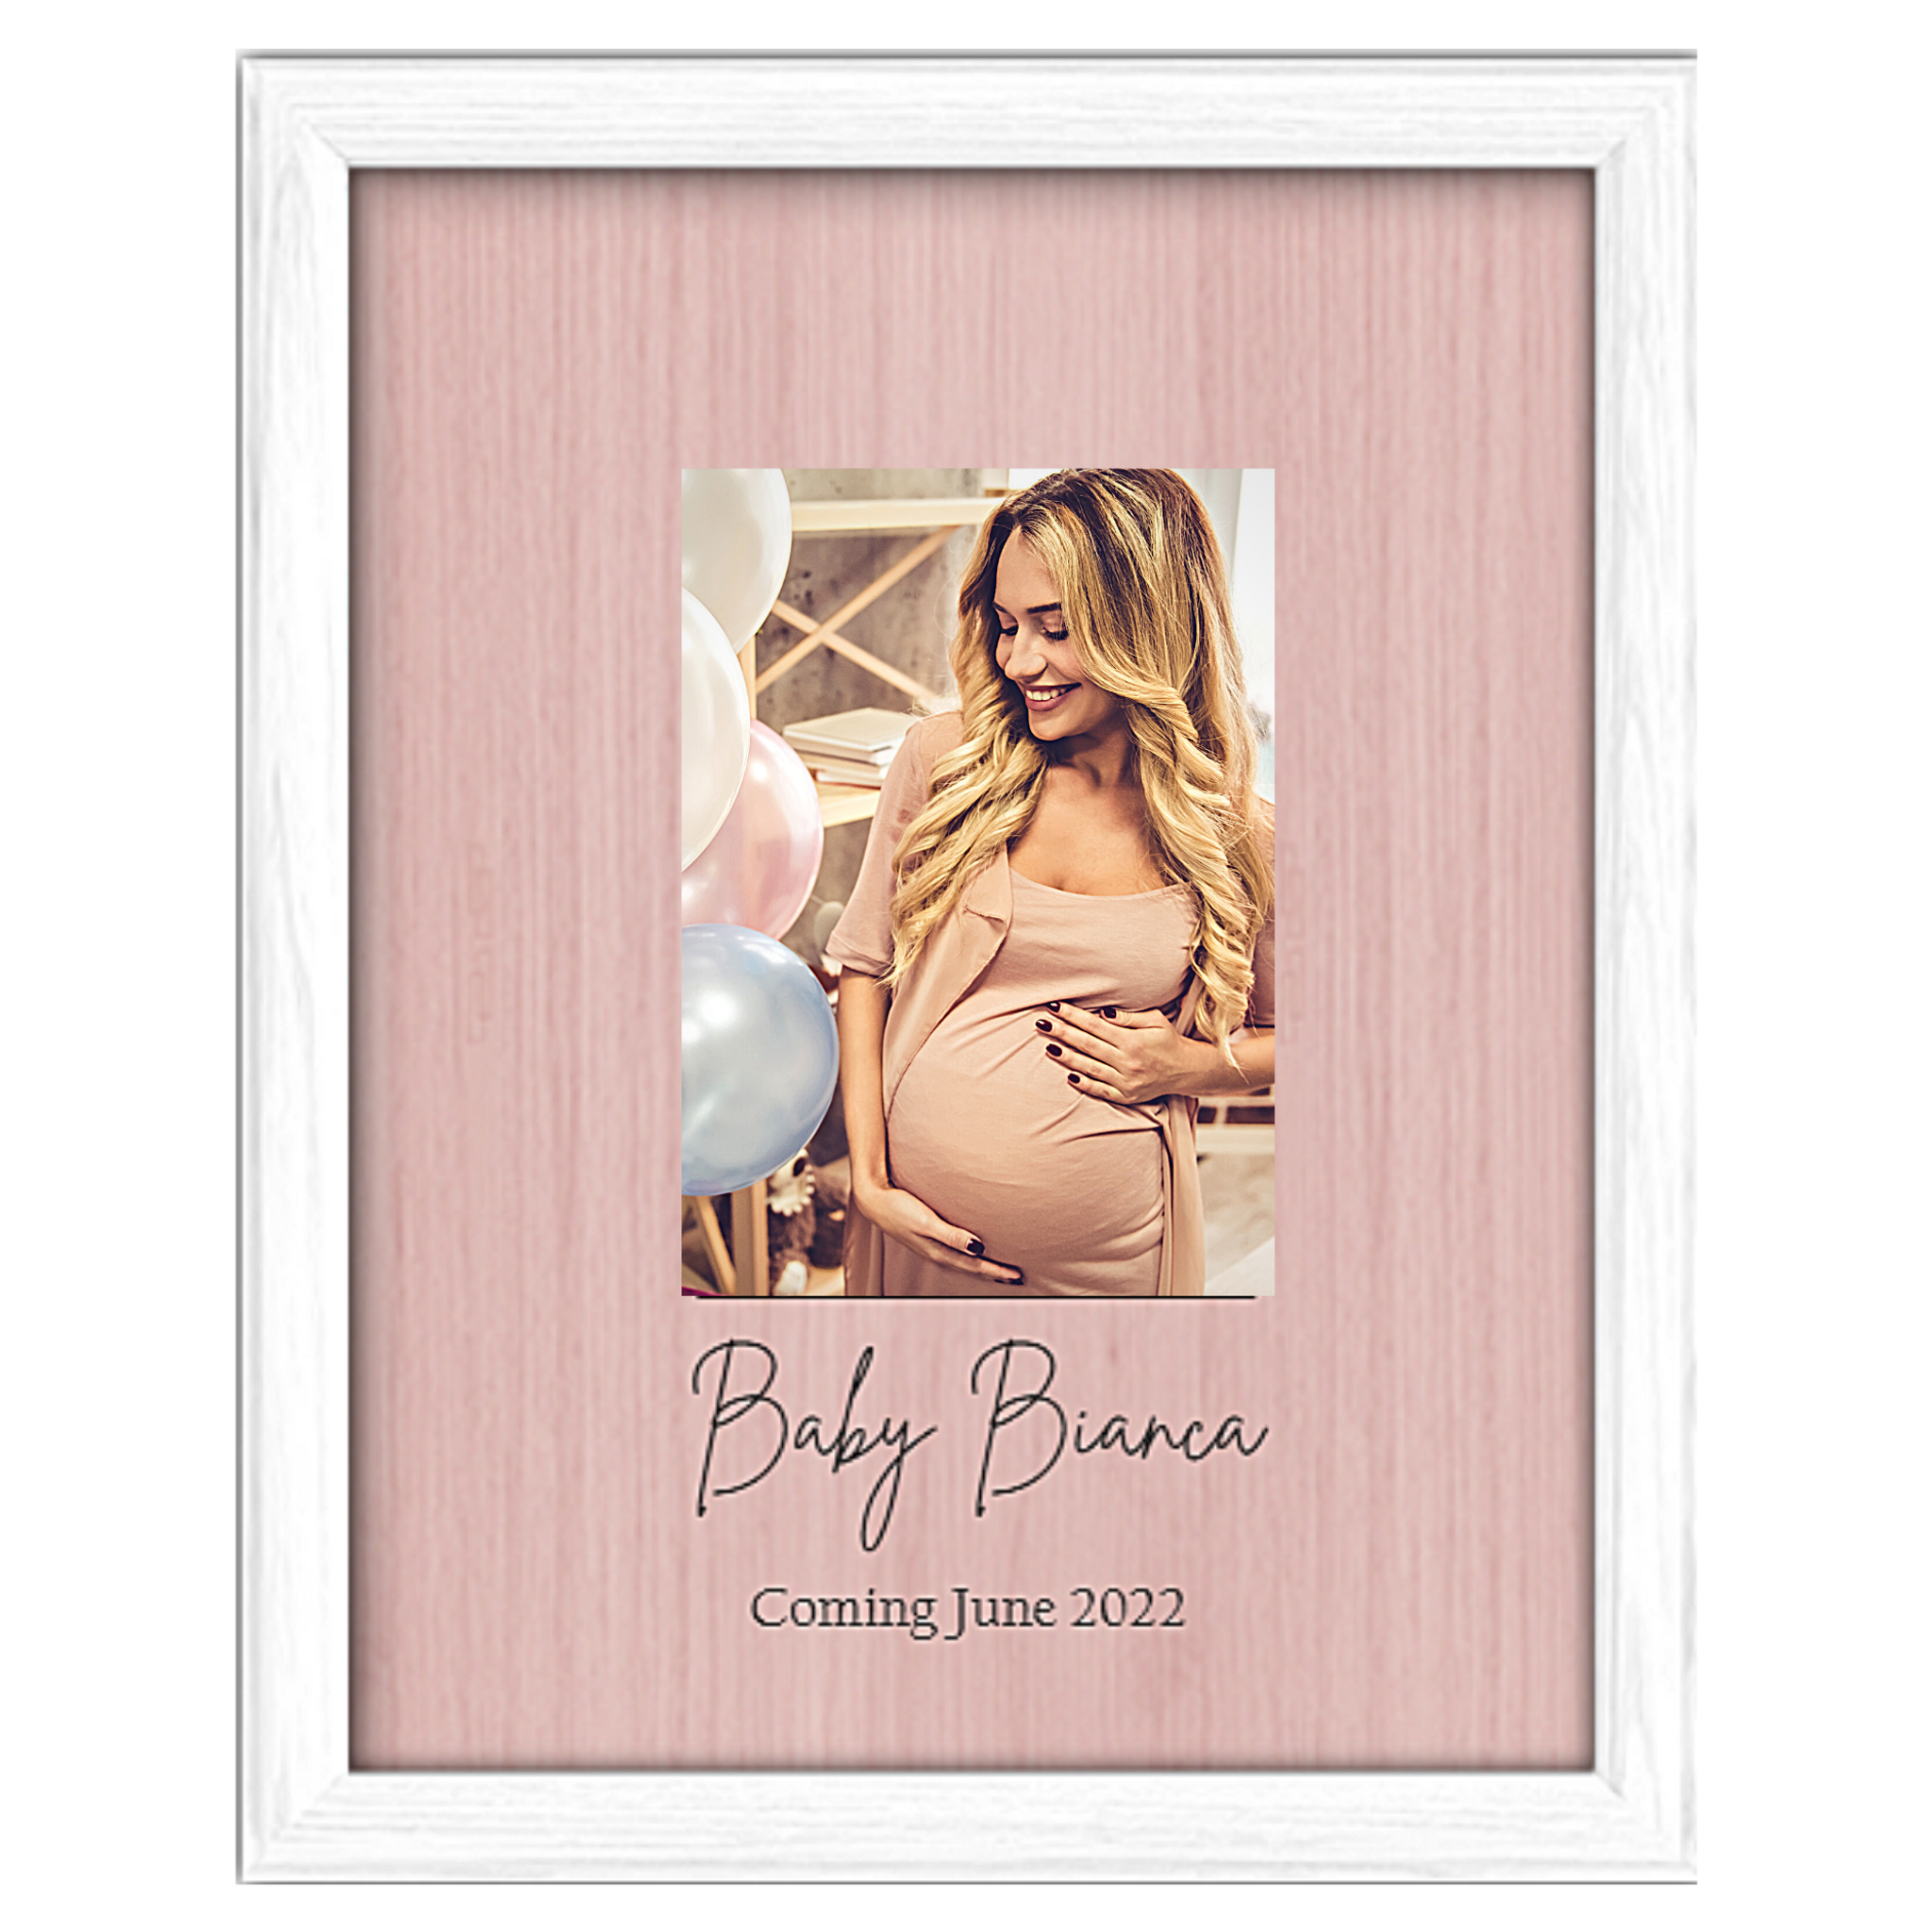 Baby Shower Guest Signature Book Alternative - Signature Picture Frame -  Personalized with any Name and Date - Holds 5x7 Photo - 11x14 Frame